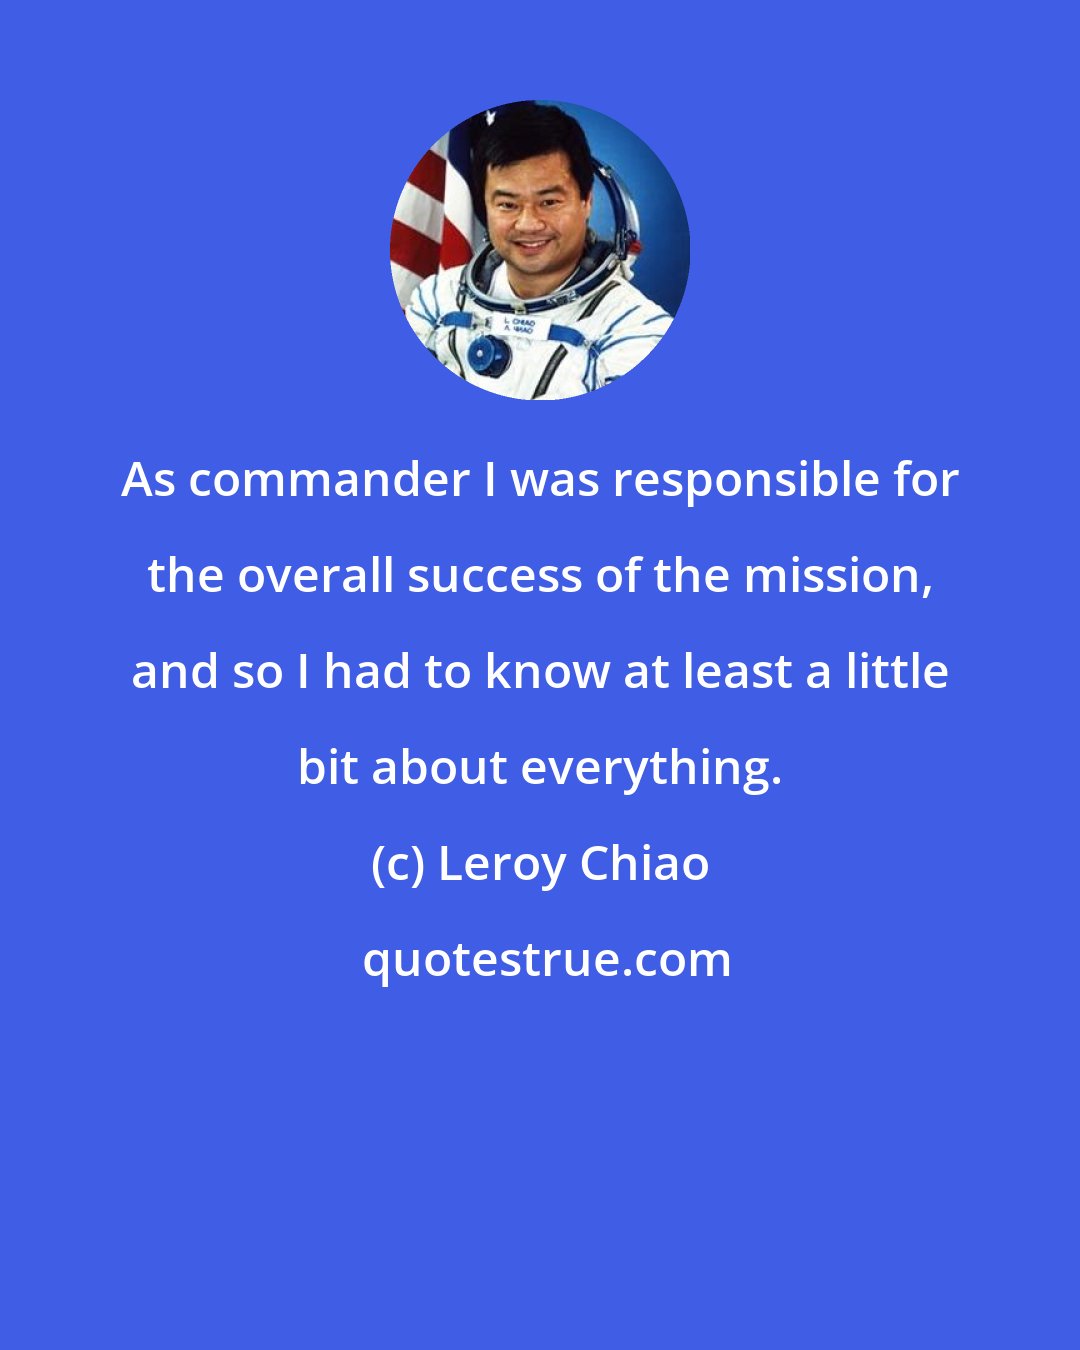 Leroy Chiao: As commander I was responsible for the overall success of the mission, and so I had to know at least a little bit about everything.